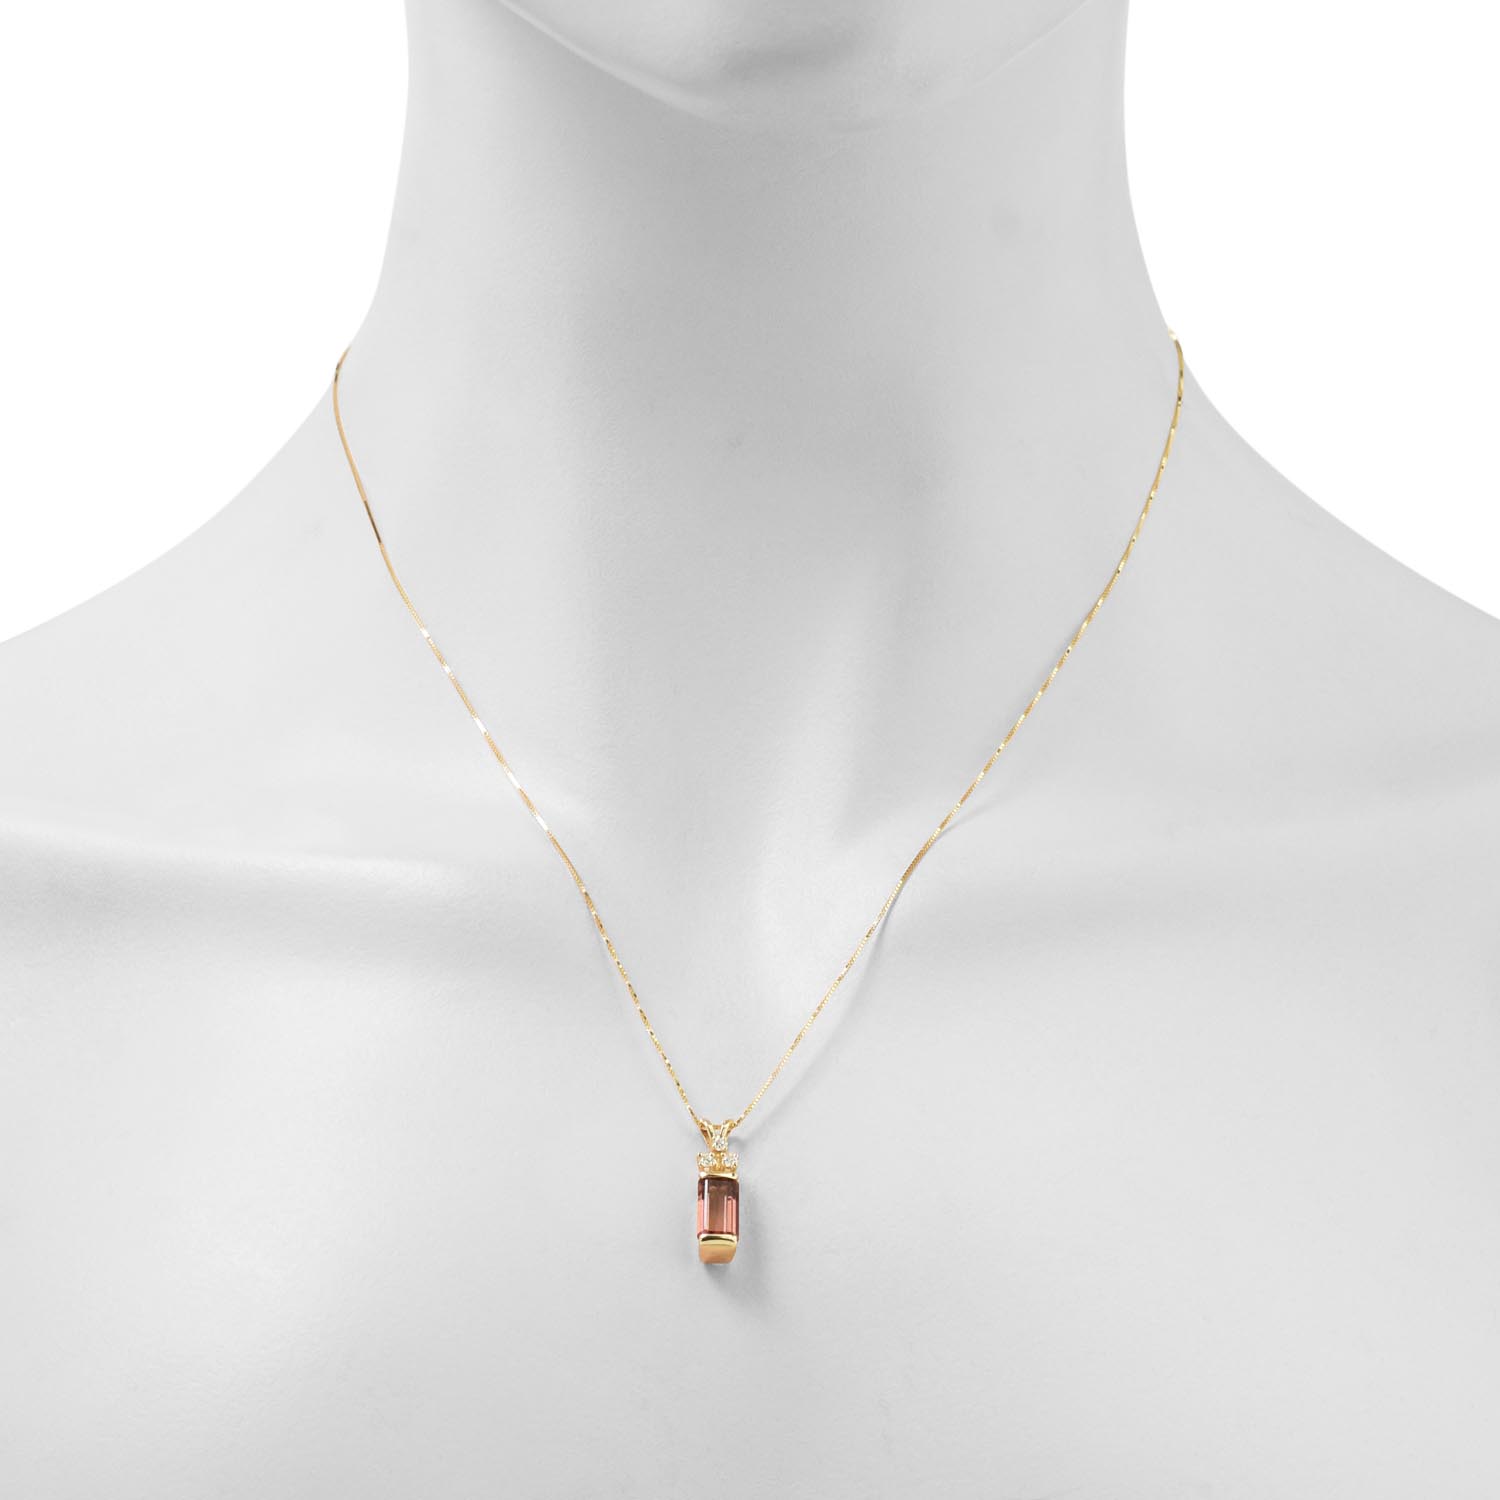 Maine Pink Tourmaline Necklace in 14kt Yellow Gold with Diamonds (1/10ct tw)